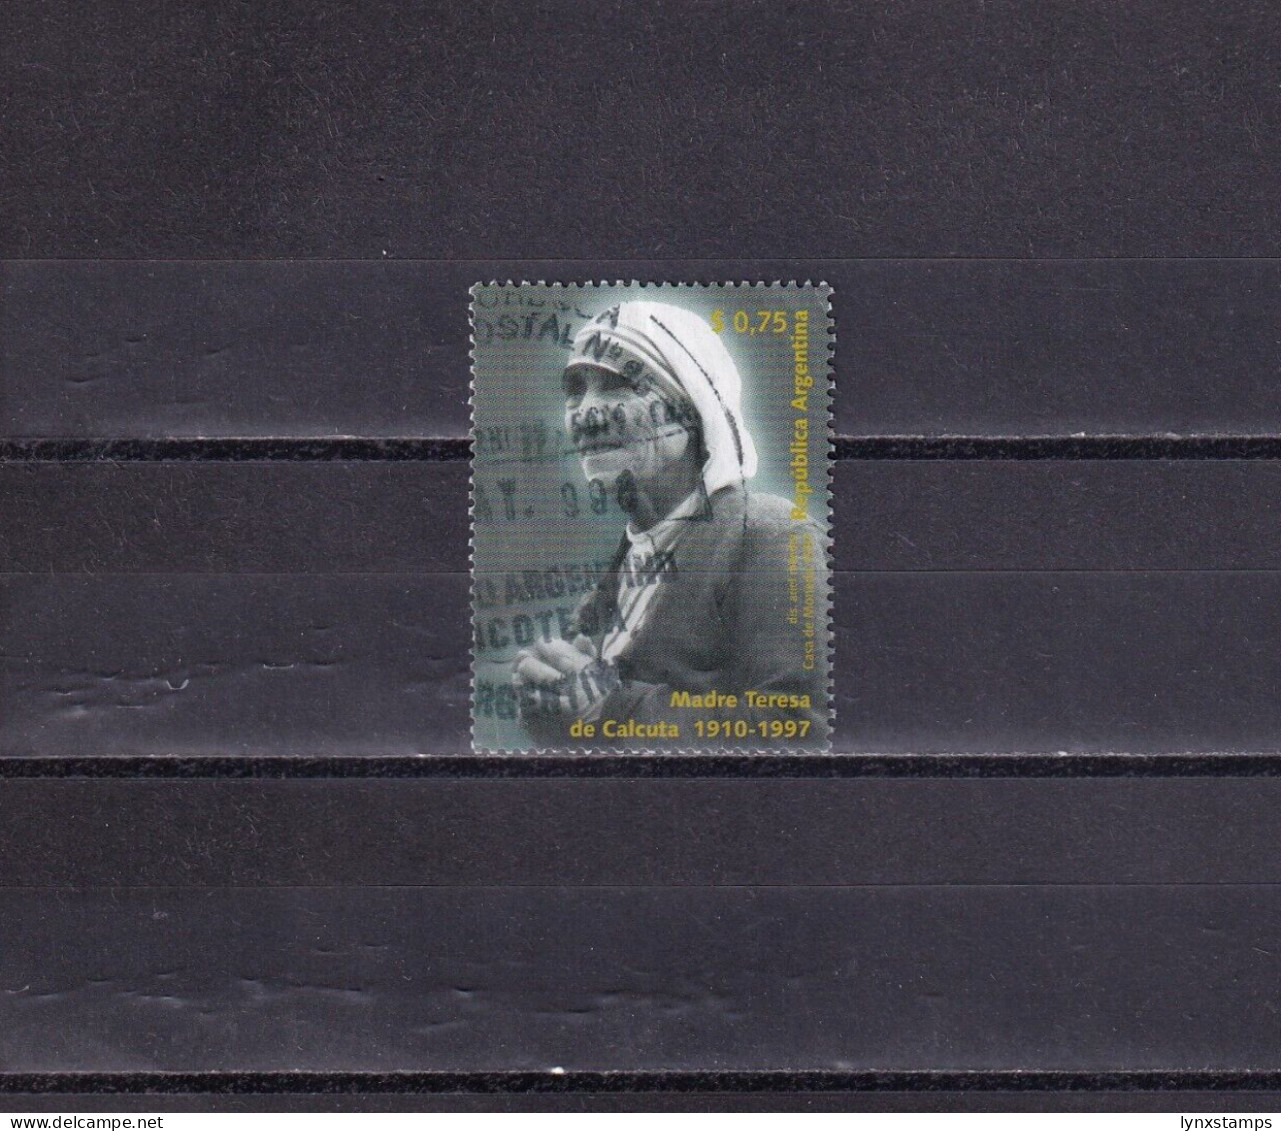 SA04 Argentina 1997 Mother Teresa Commemoration Used Stamp - Unused Stamps